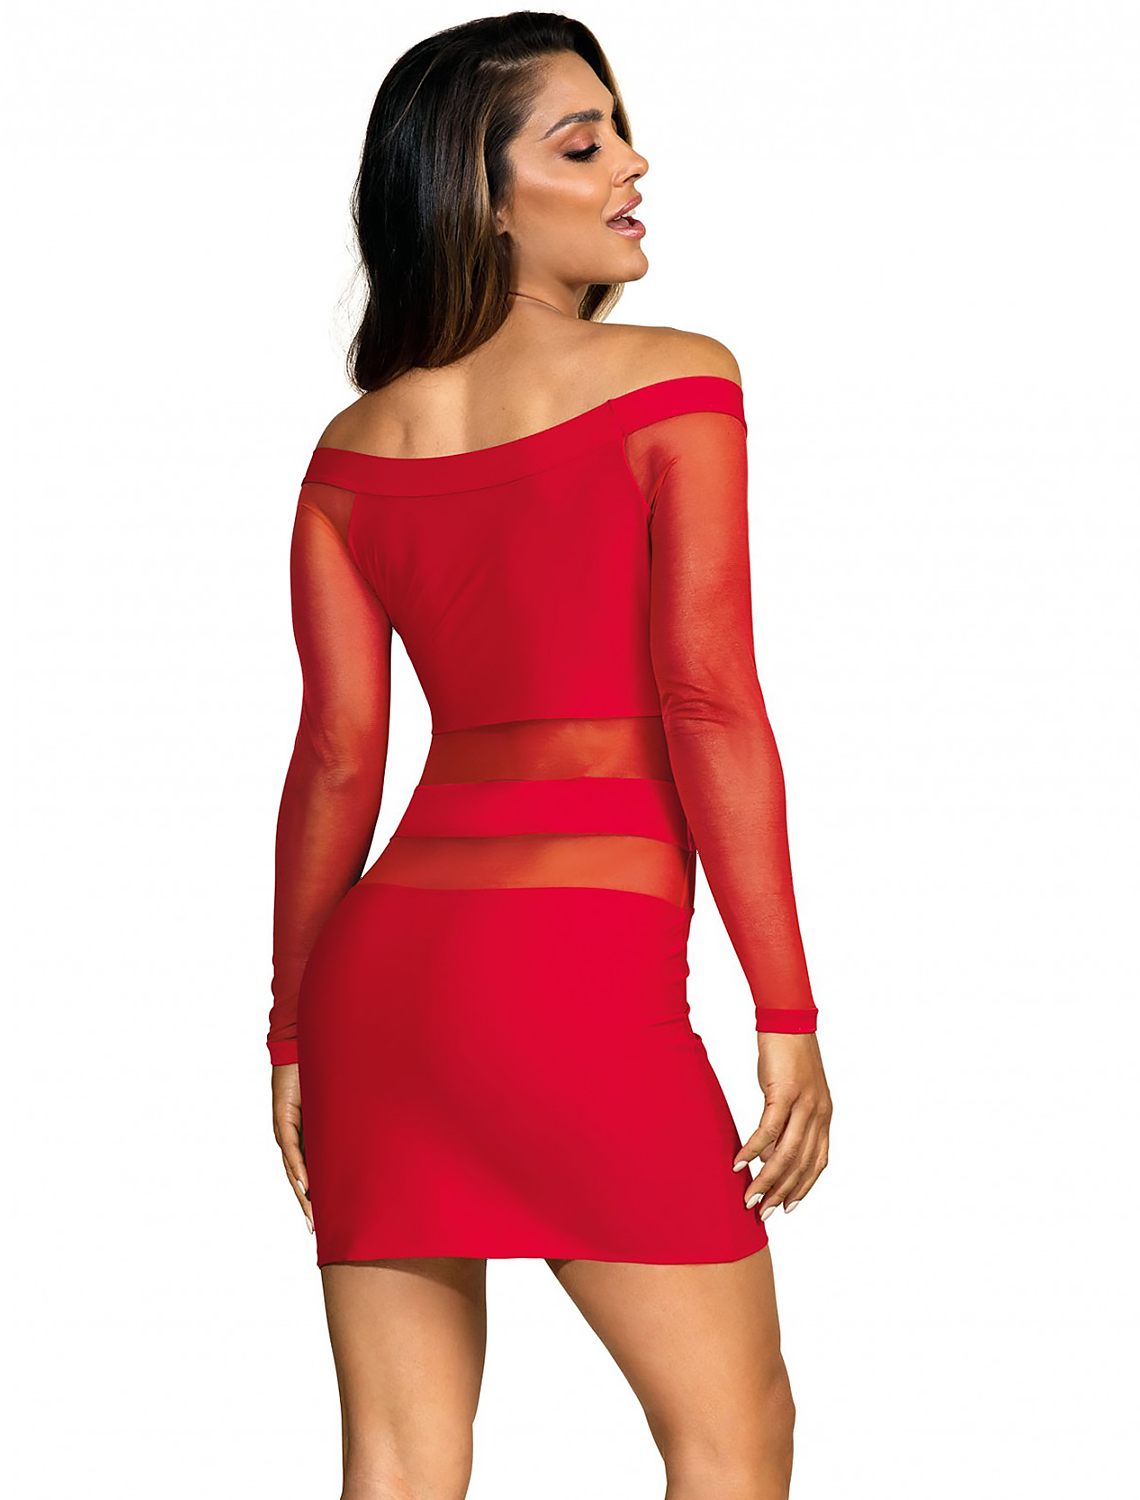 Robe clubbing rouge manches longues V-9299 Axami dos